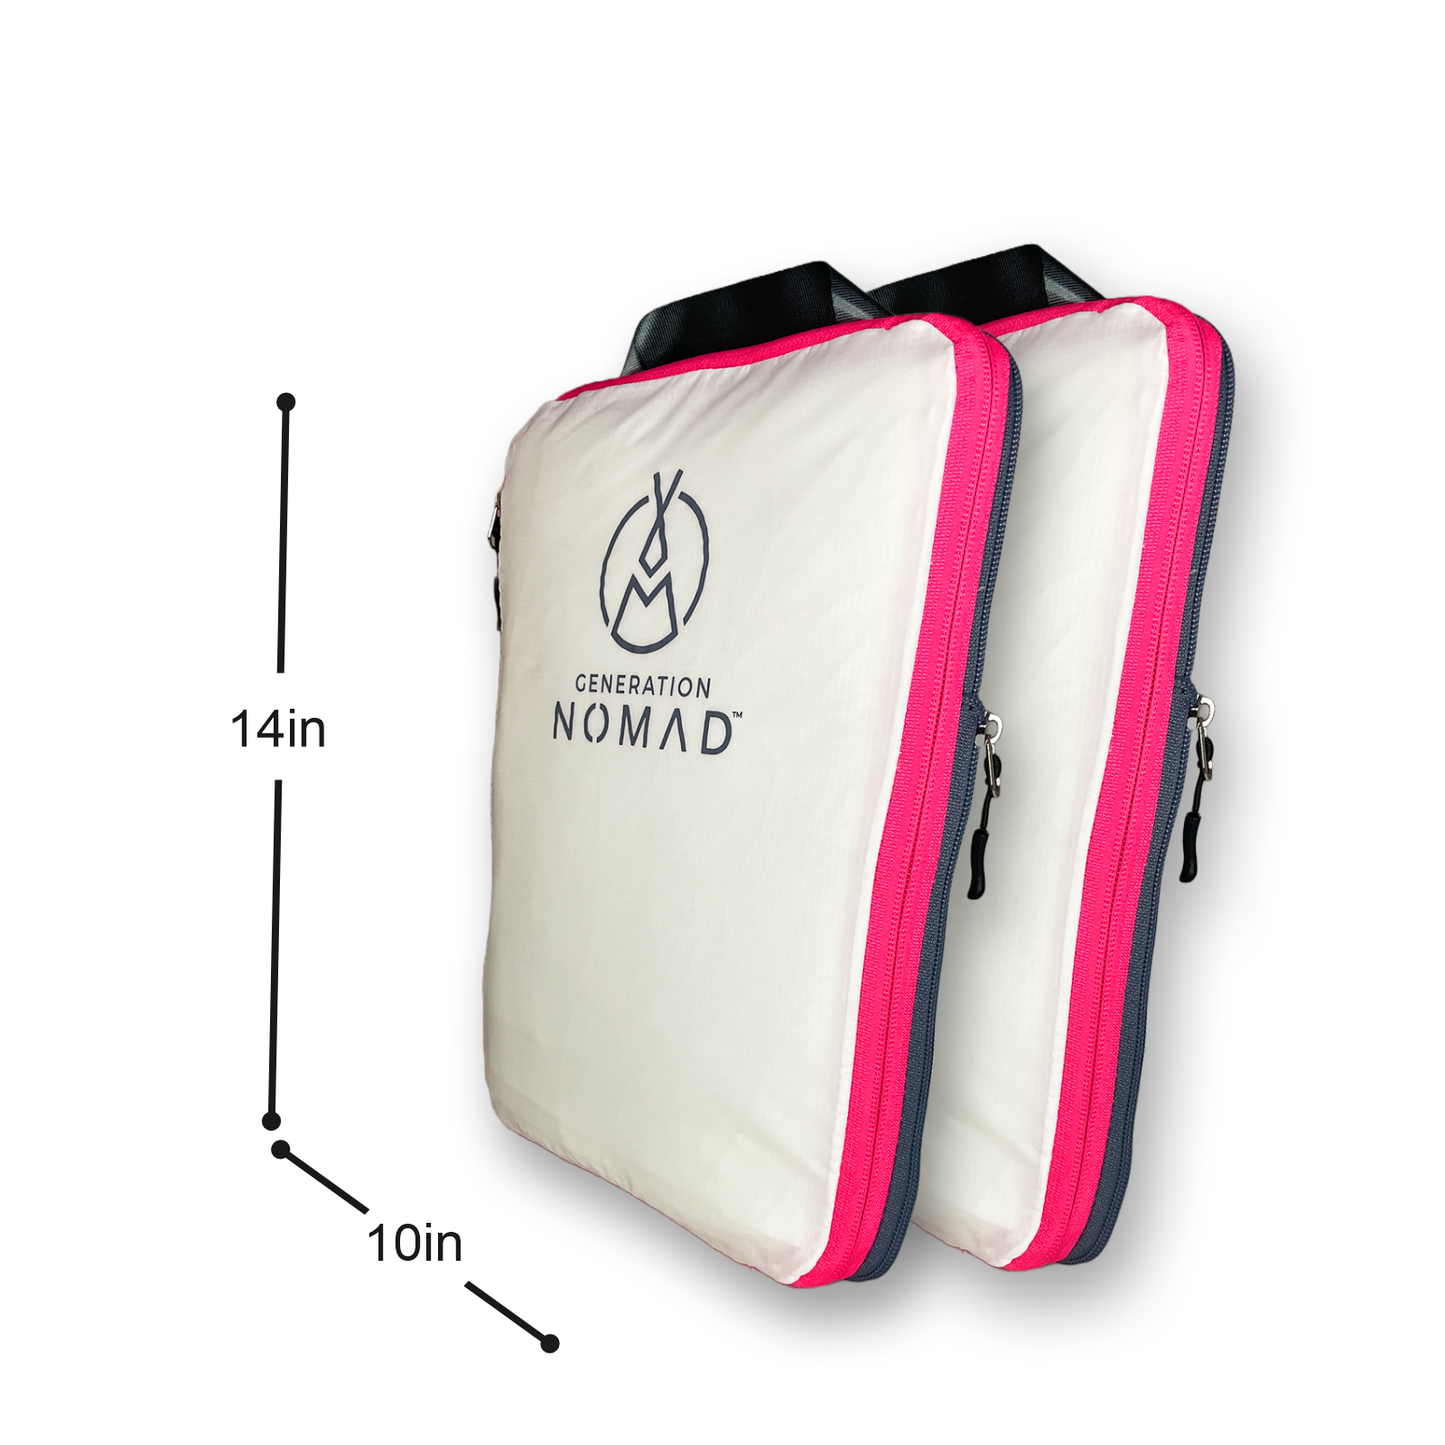 Travel Accessories Series - Packing: Packing cubes vs Compression Bags - No  Footprint Nomads